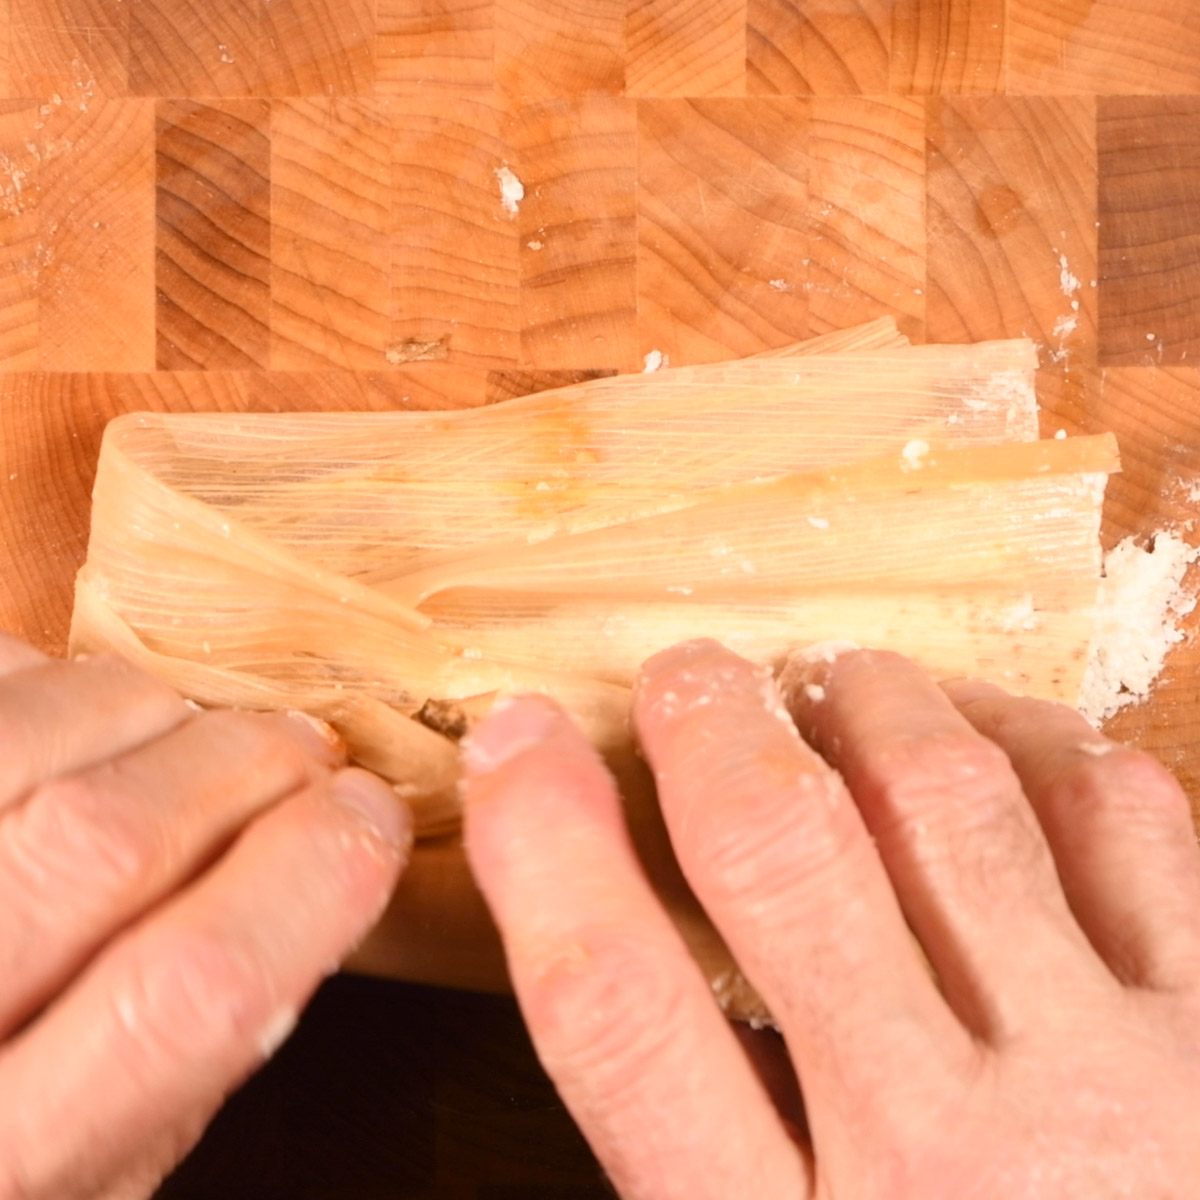 Fold over to form the tamale.